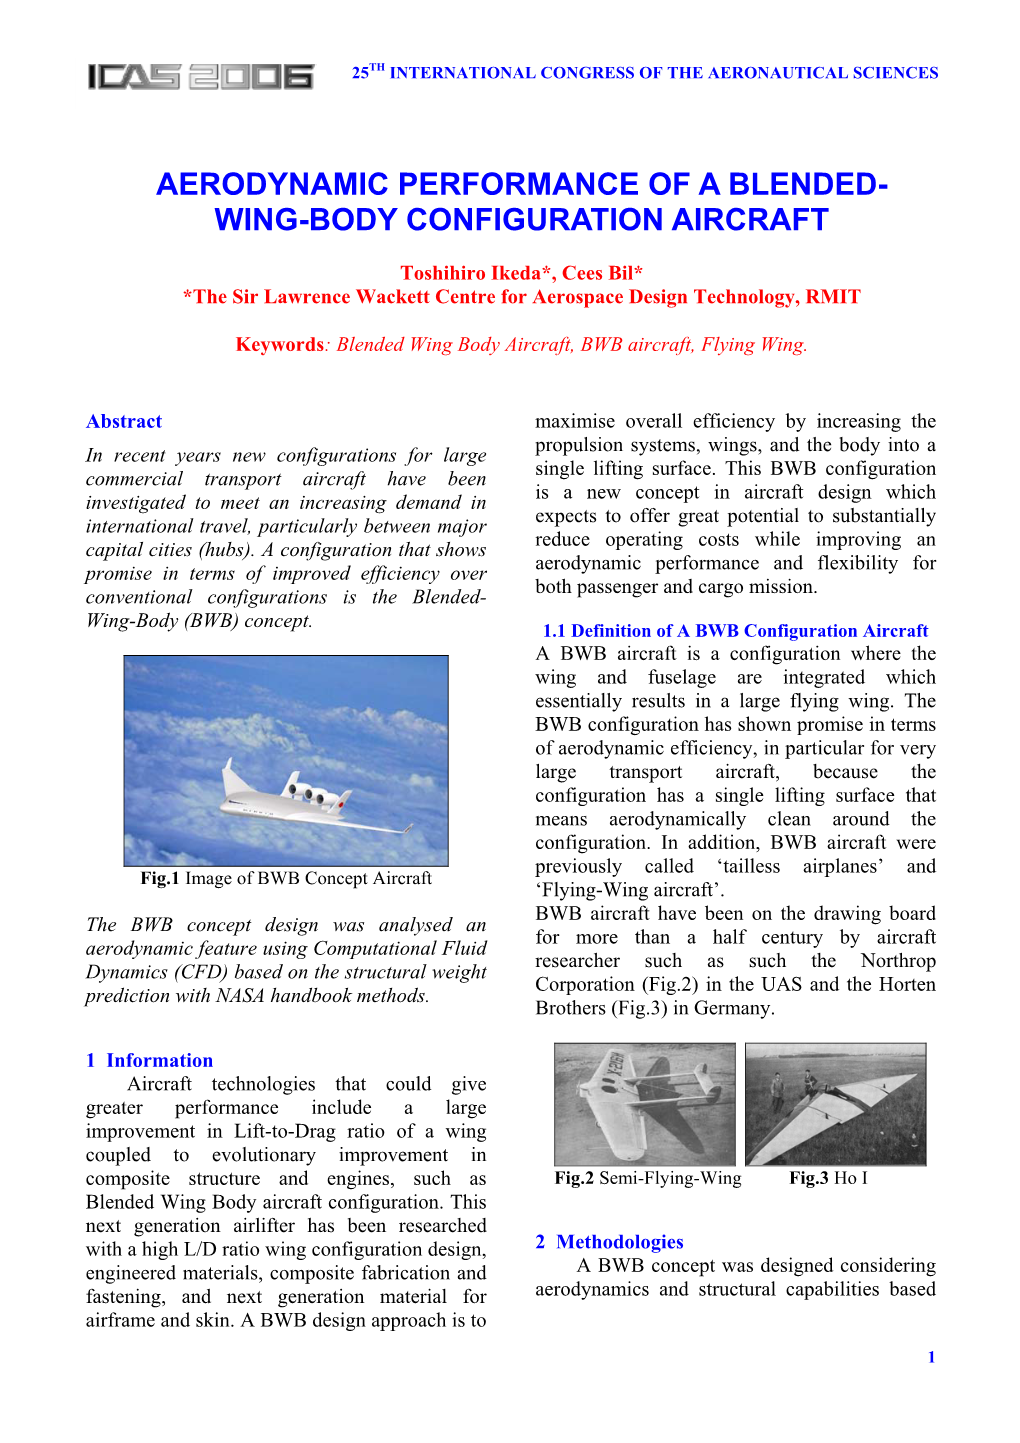 Aerodynamic Performance of a Blended- Wing-Body Configuration Aircraft